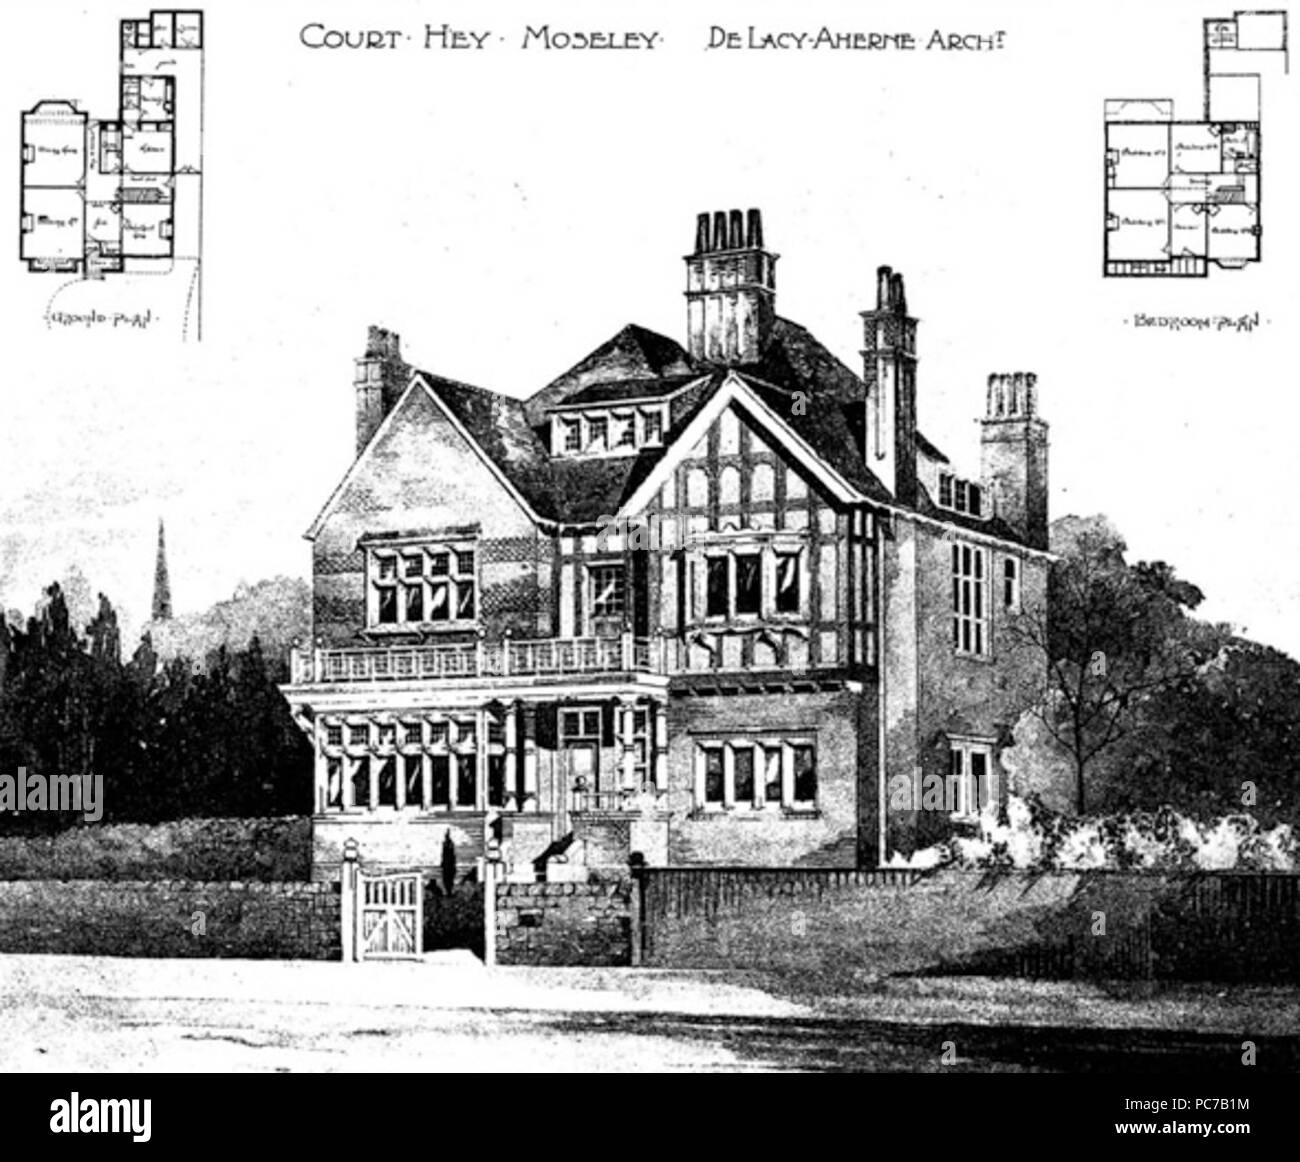 145 Court Hey, Moseley - William De Lacy Aherne Stock Photo